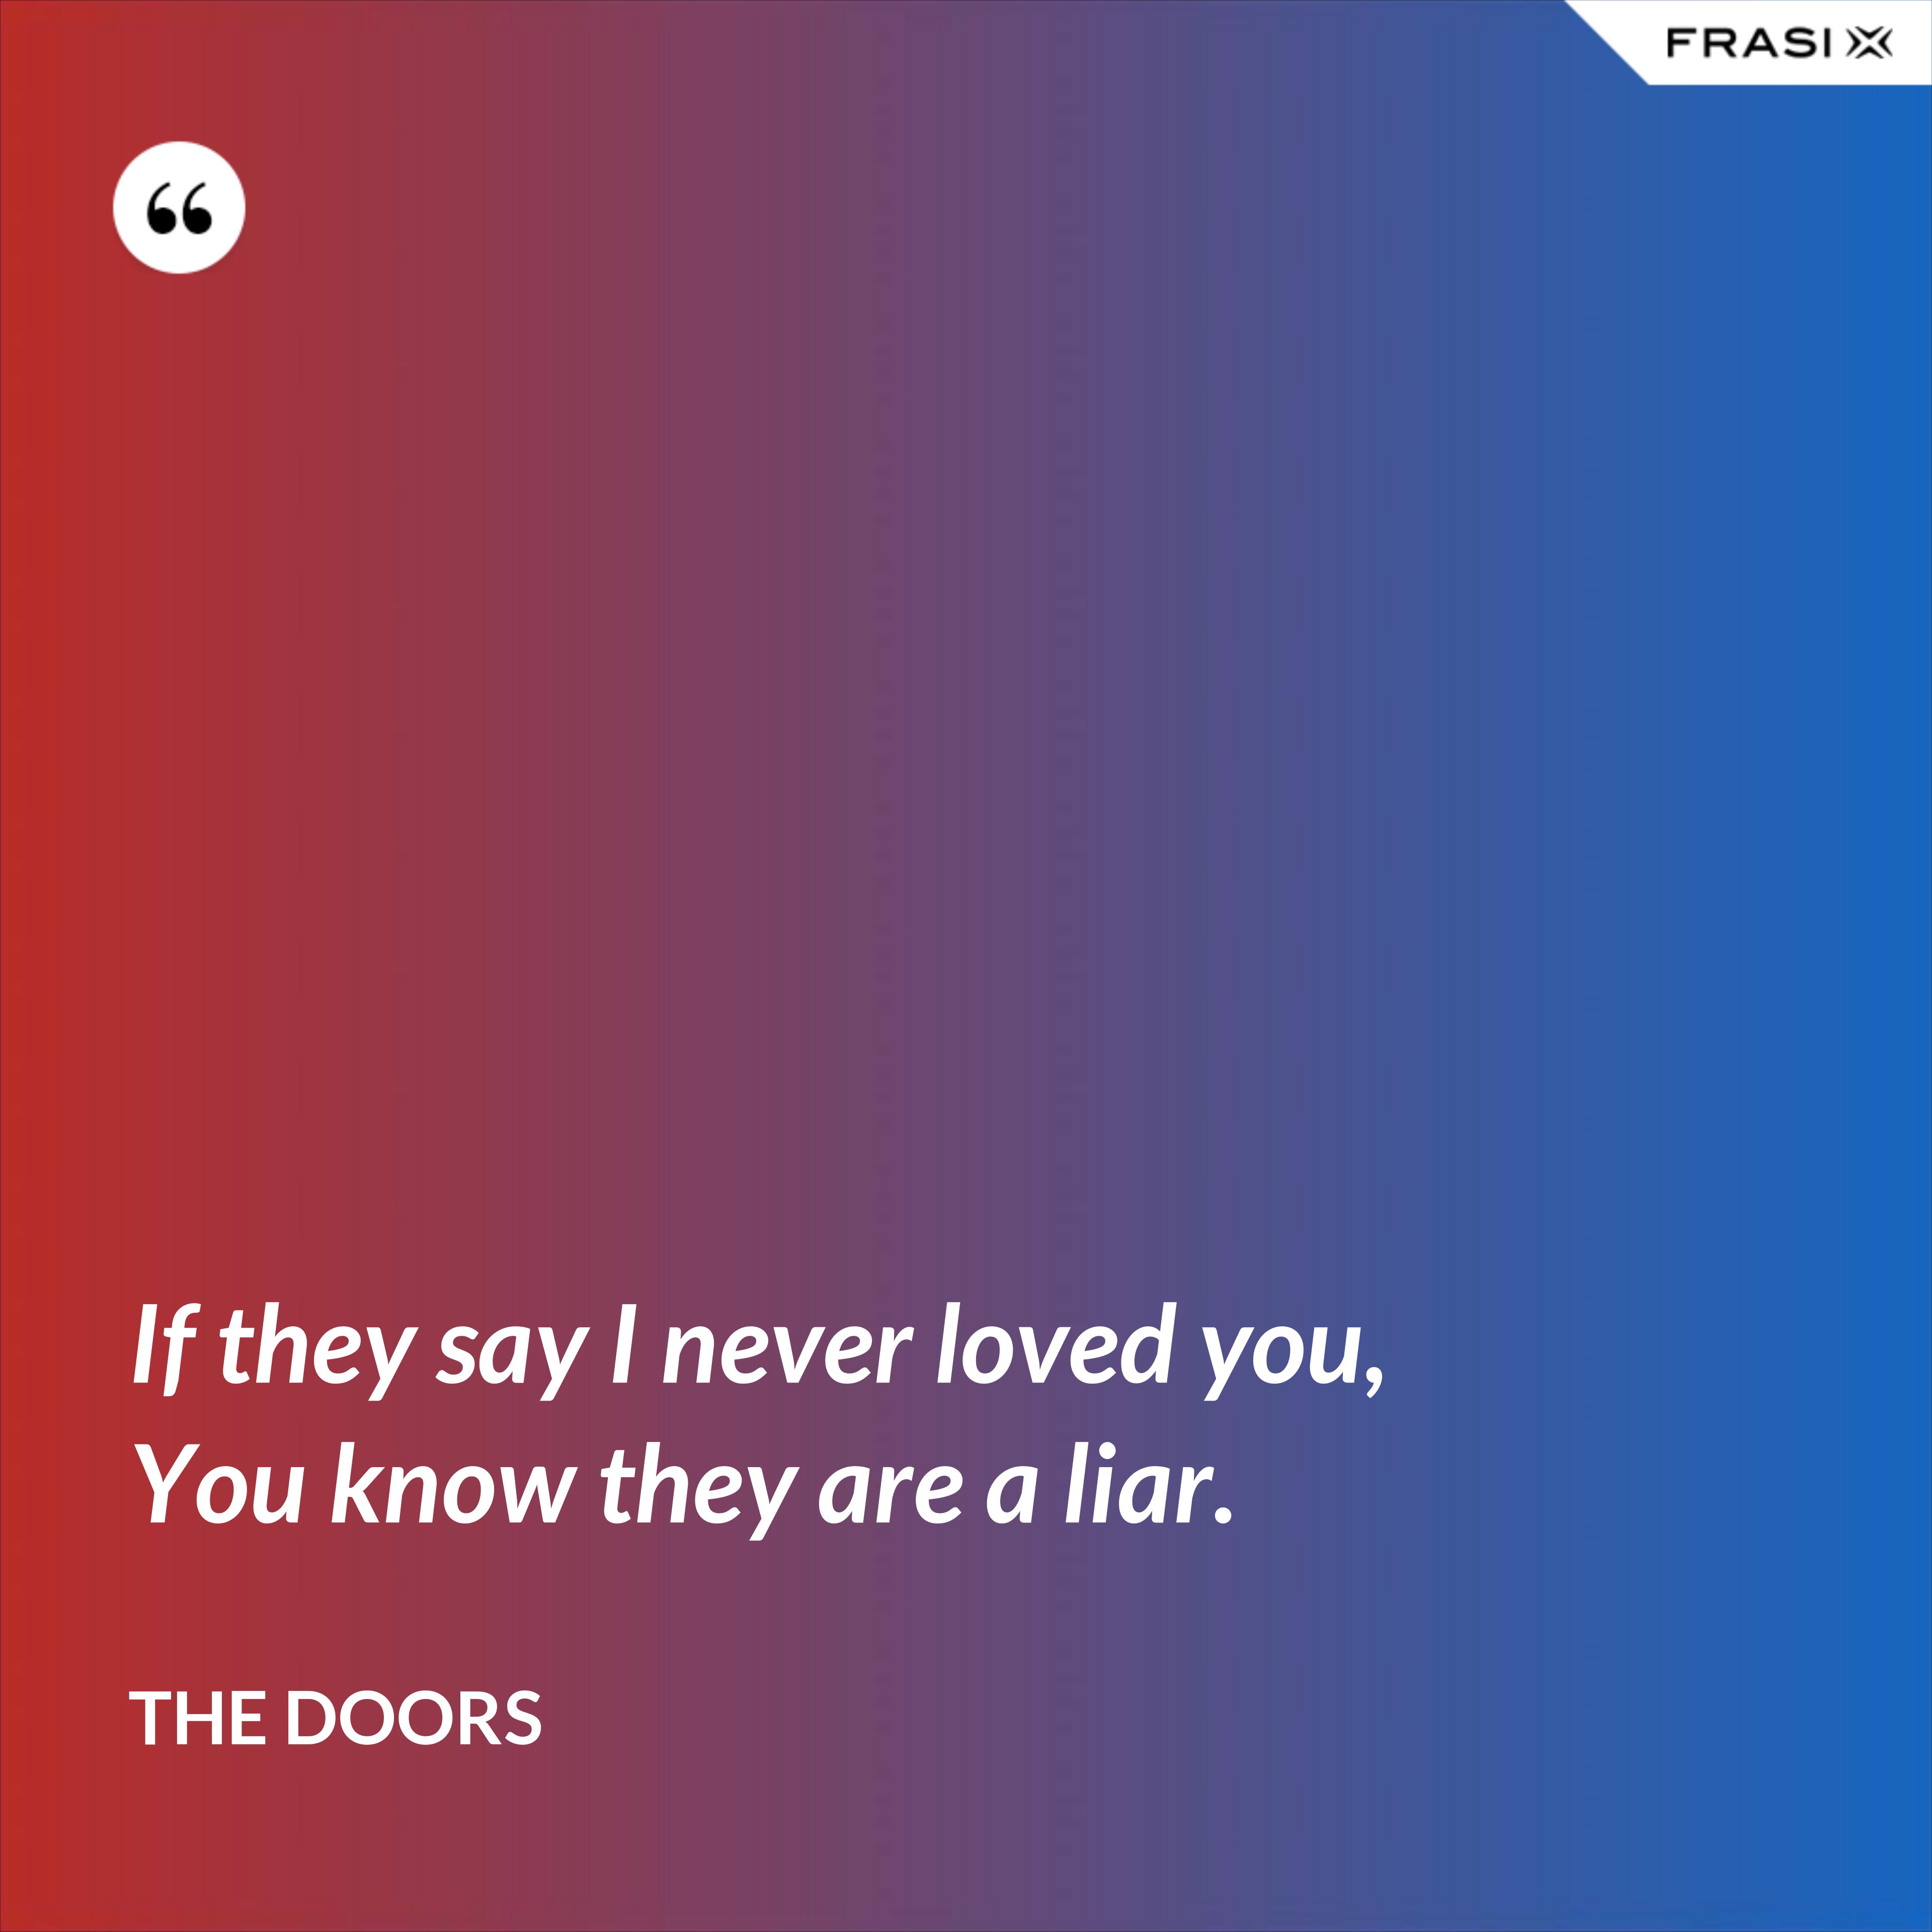 If they say I never loved you, You know they are a liar. - The Doors